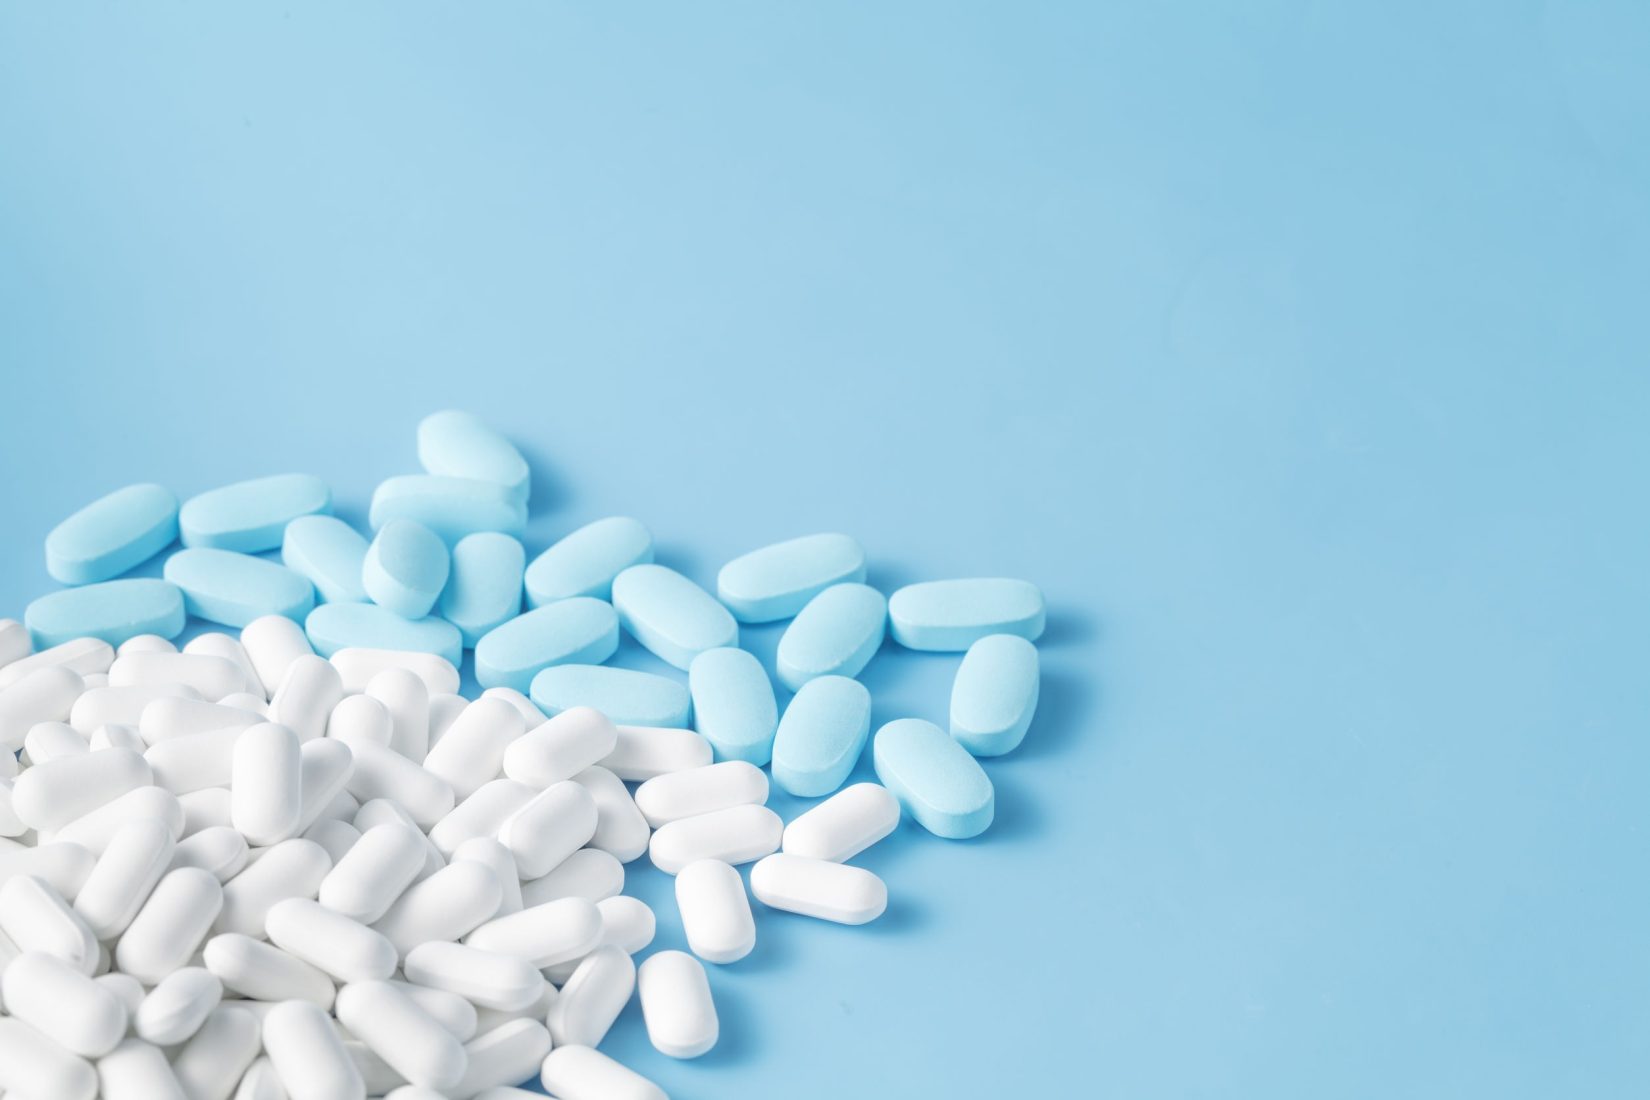 White and blue pills on a blue background